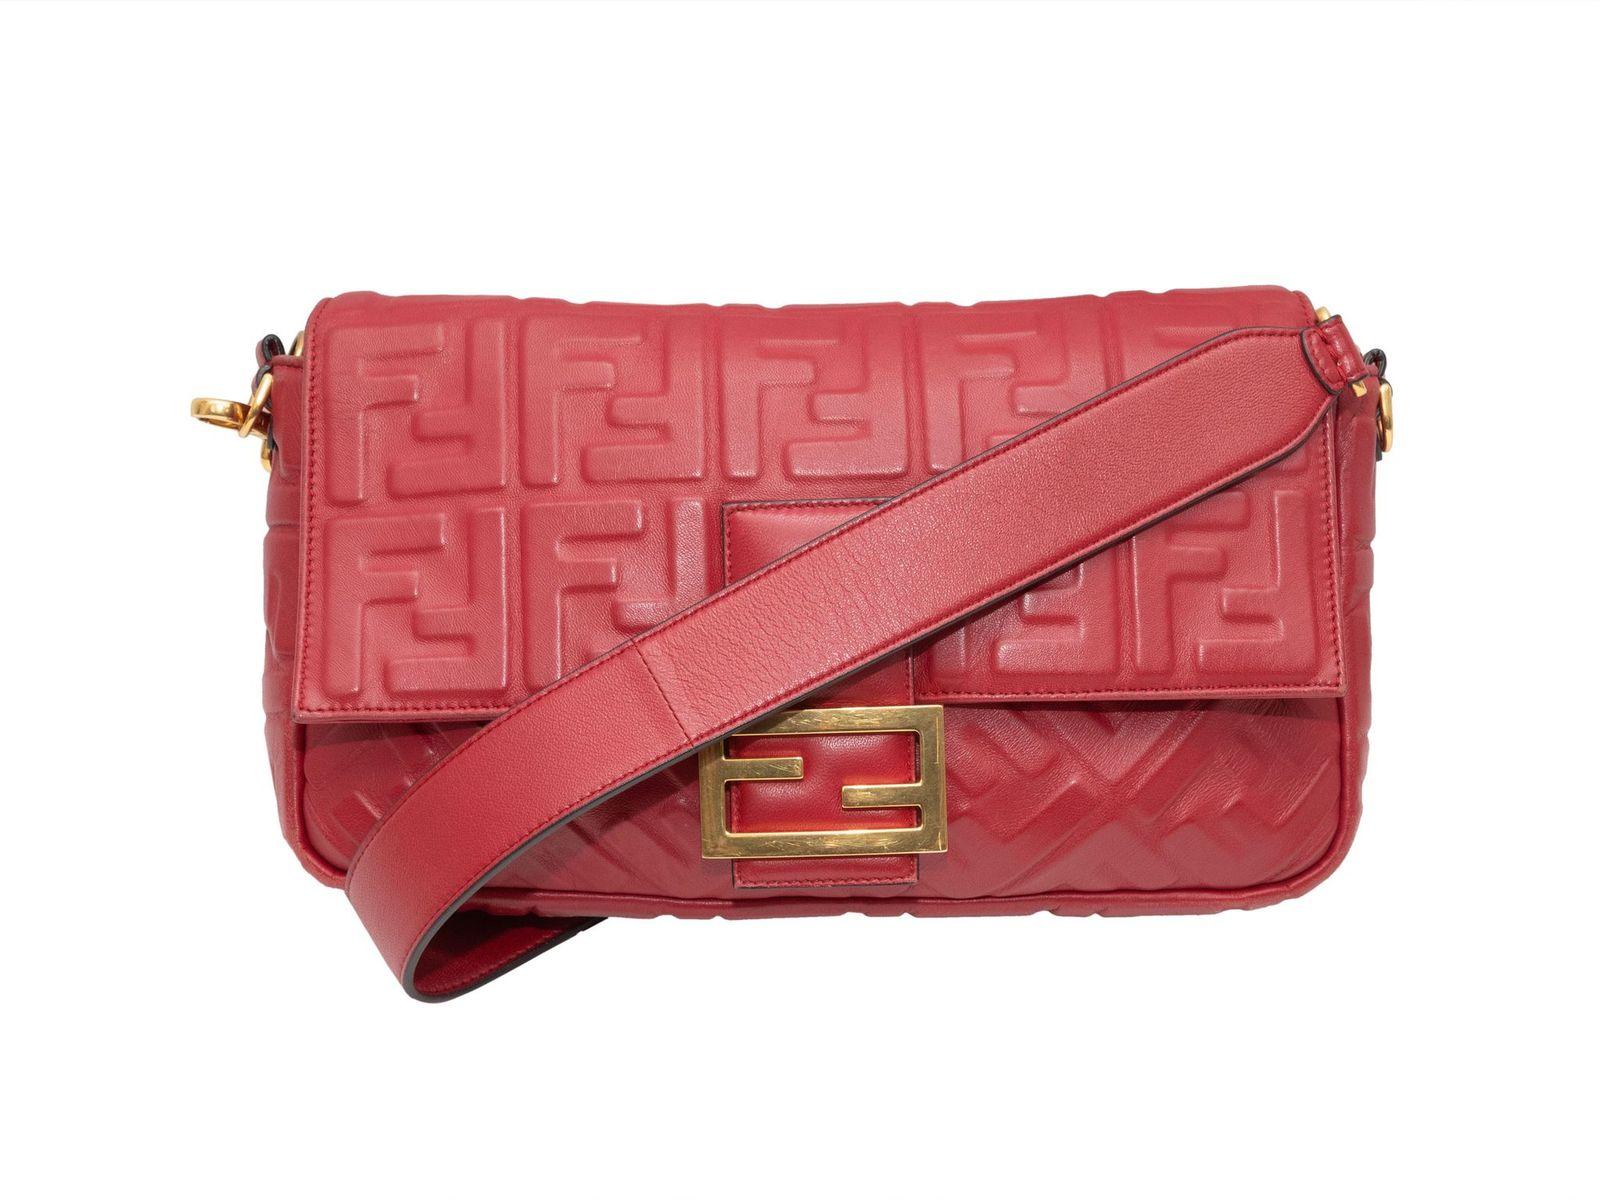 Fendi Red Embossed Leather Zucca NM Baguette Bag 1